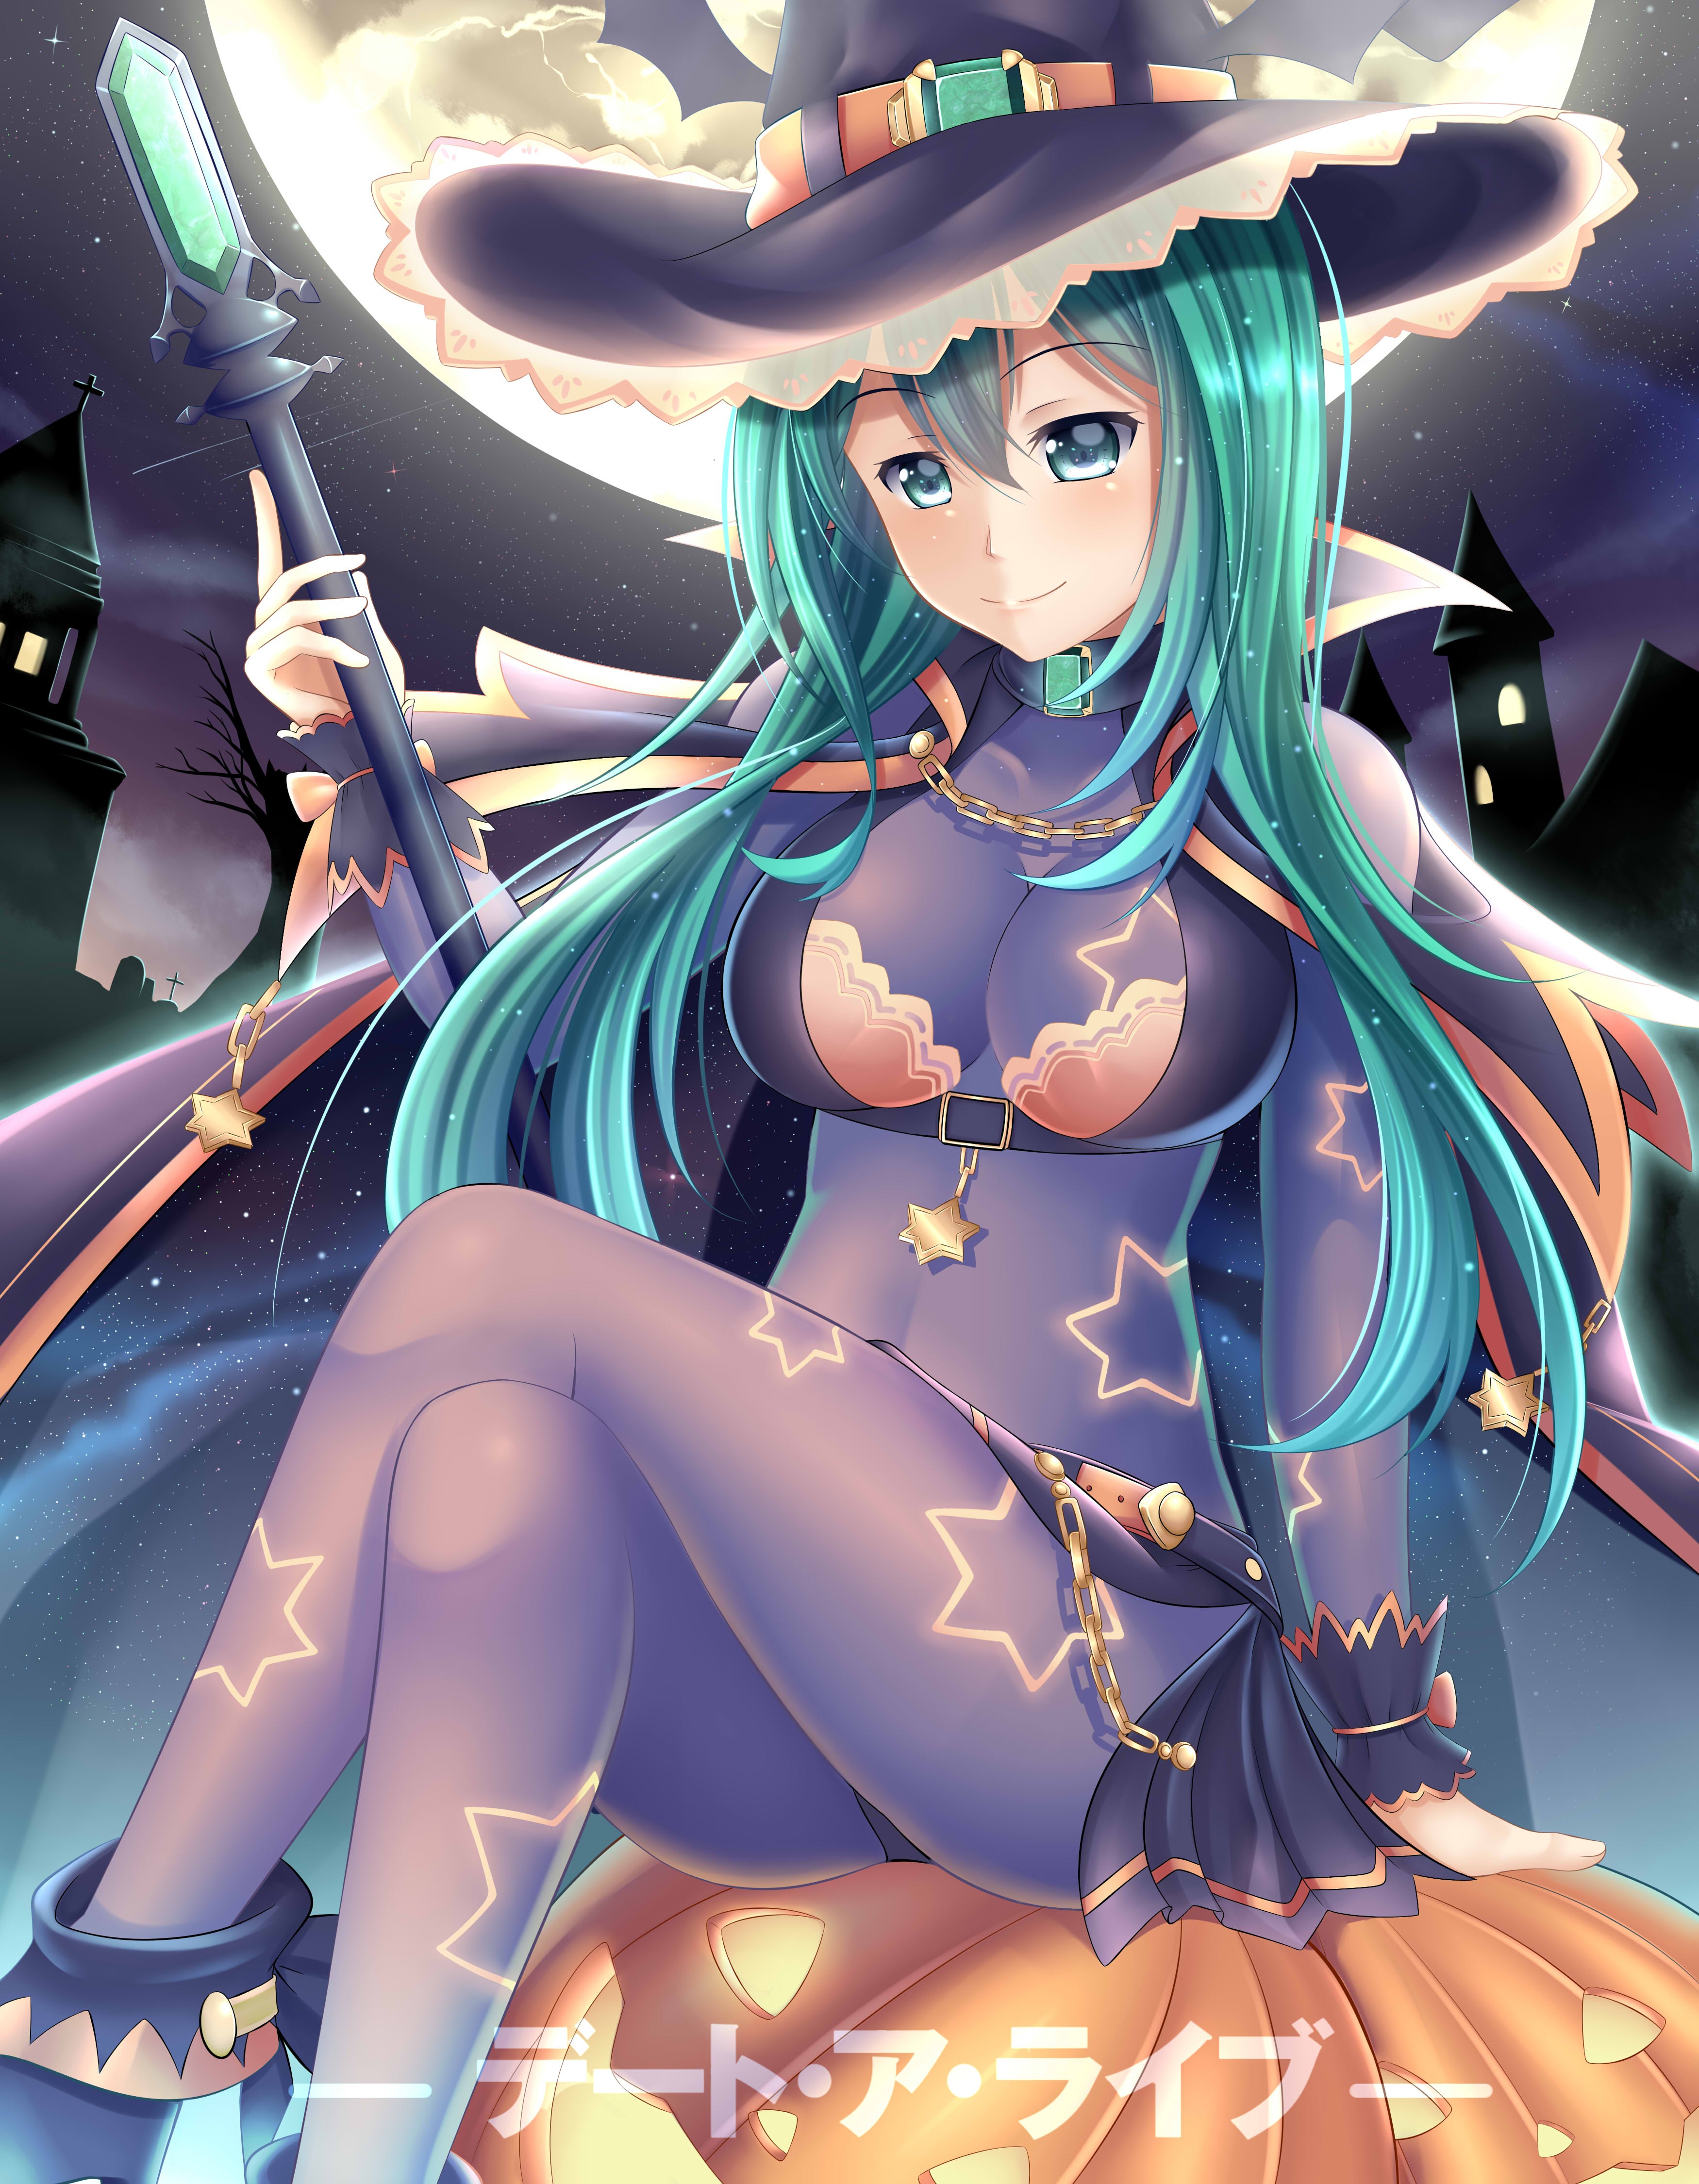 Anime 3500x4500 anime anime girls long hair Date A Live cyan hair green eyes elves Moon night witch hat witch pumpkin Natsumi (Date A Live)